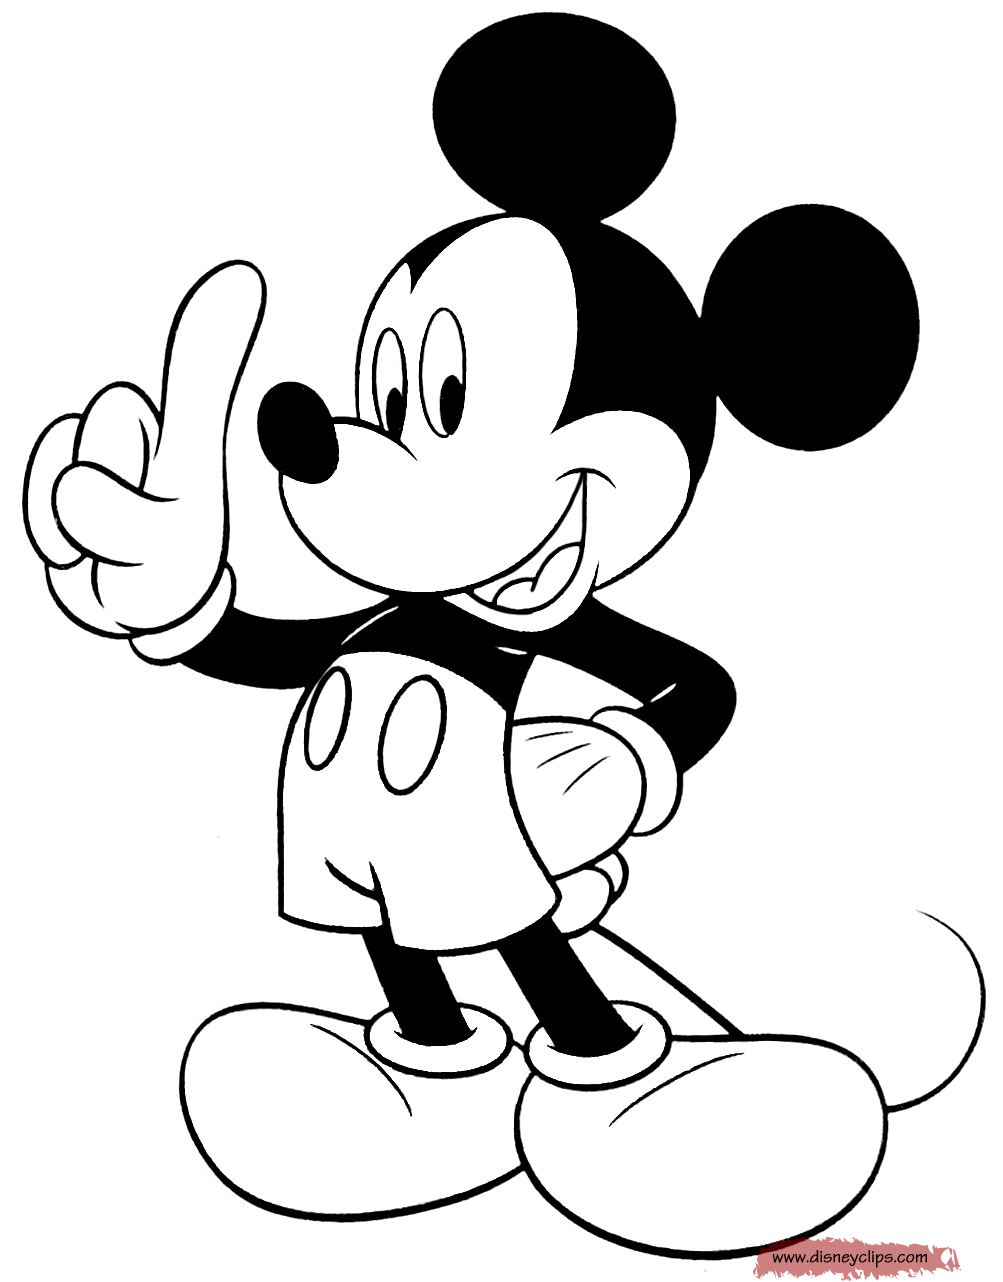 mickey mouse coloring page ausmalbilder für kinder malvorlagen und malbuch mickey page mickey coloring mouse 